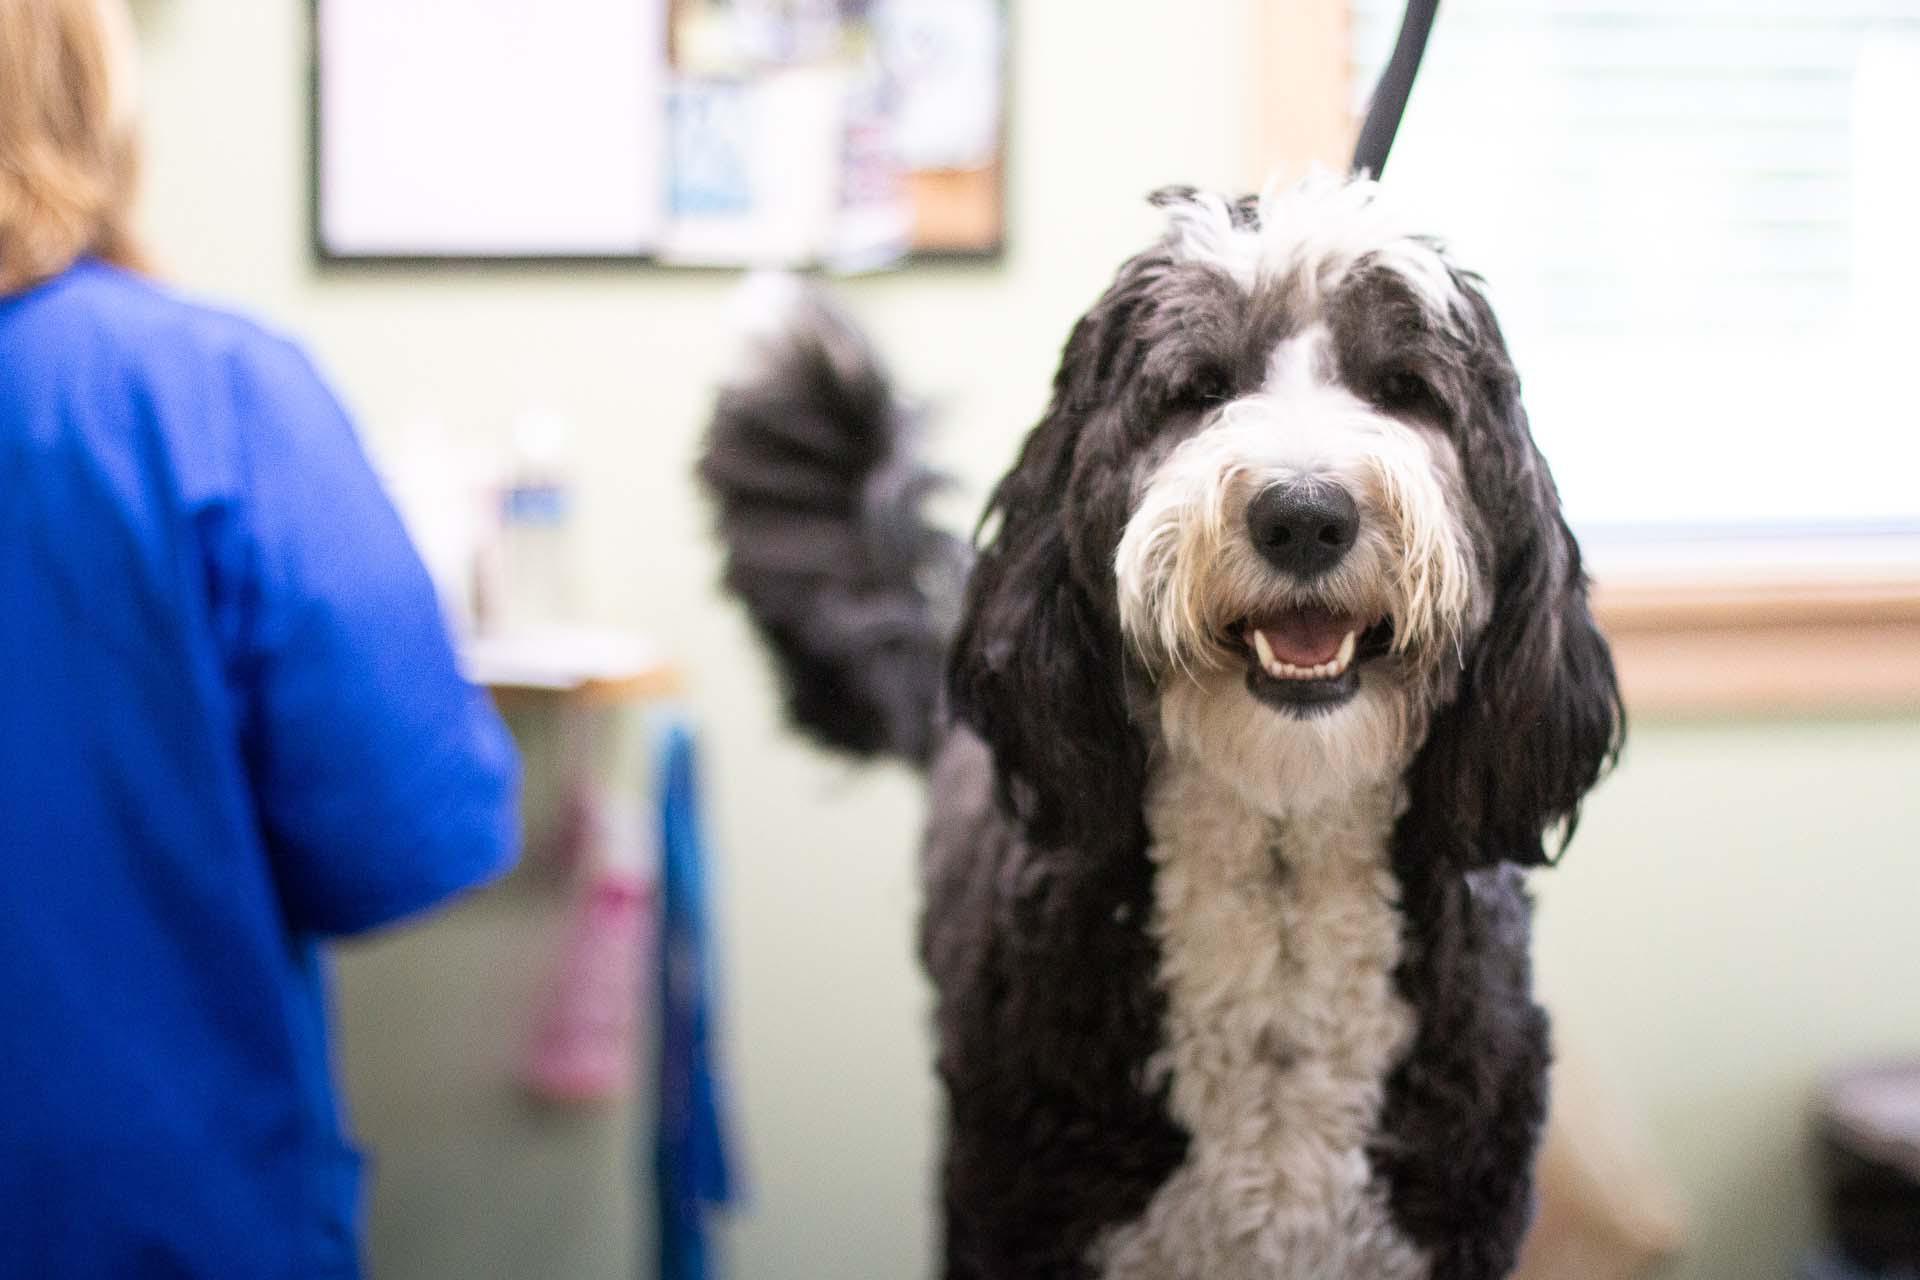 This adorable pup is all smiles for his grooming appointment!